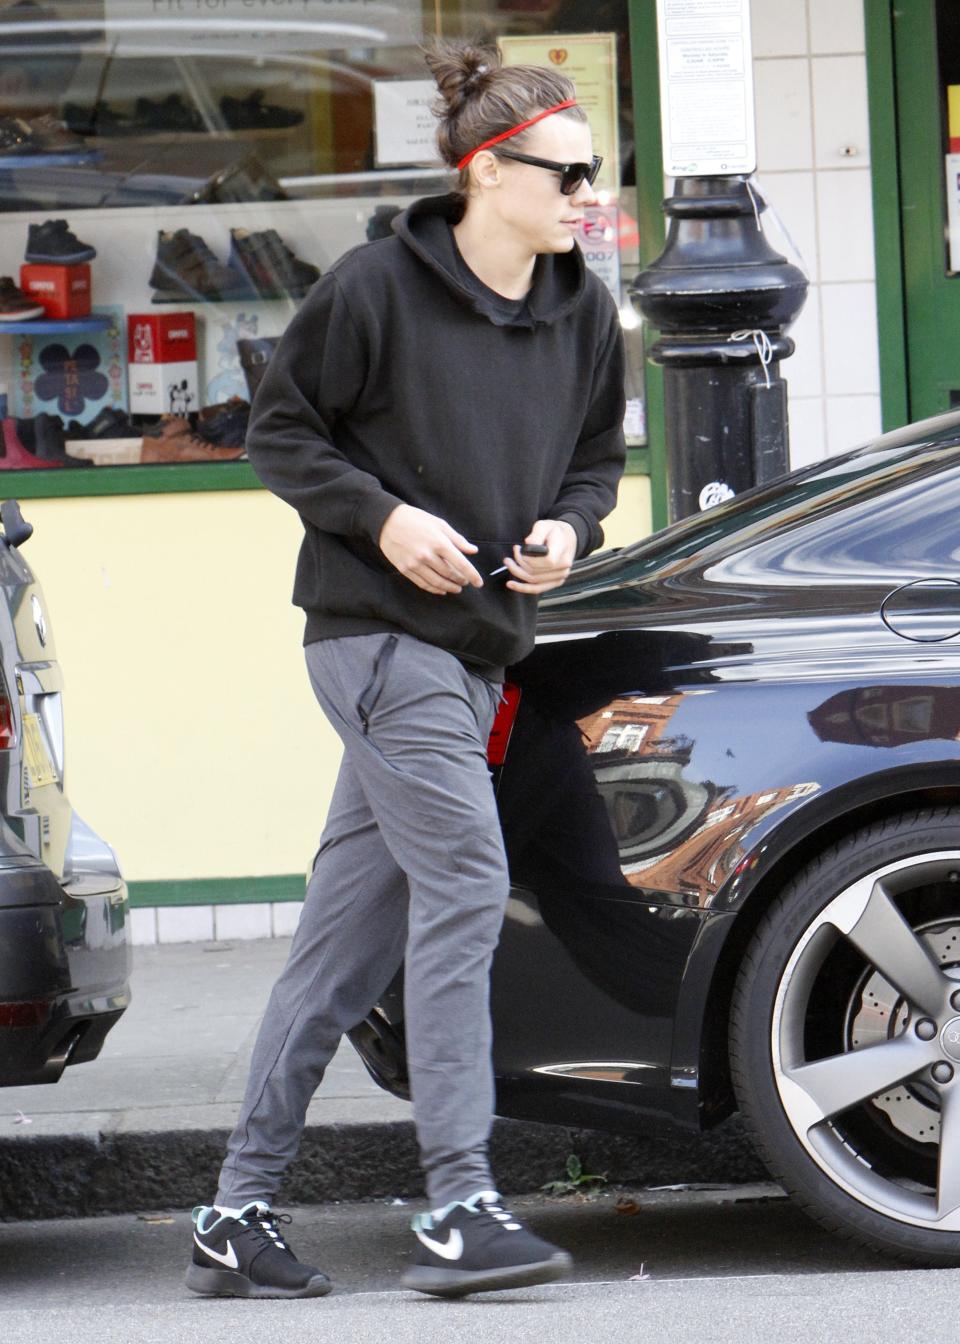 Rocking a bun around London later that month, Harry proved he’s not above running errands in sweats.